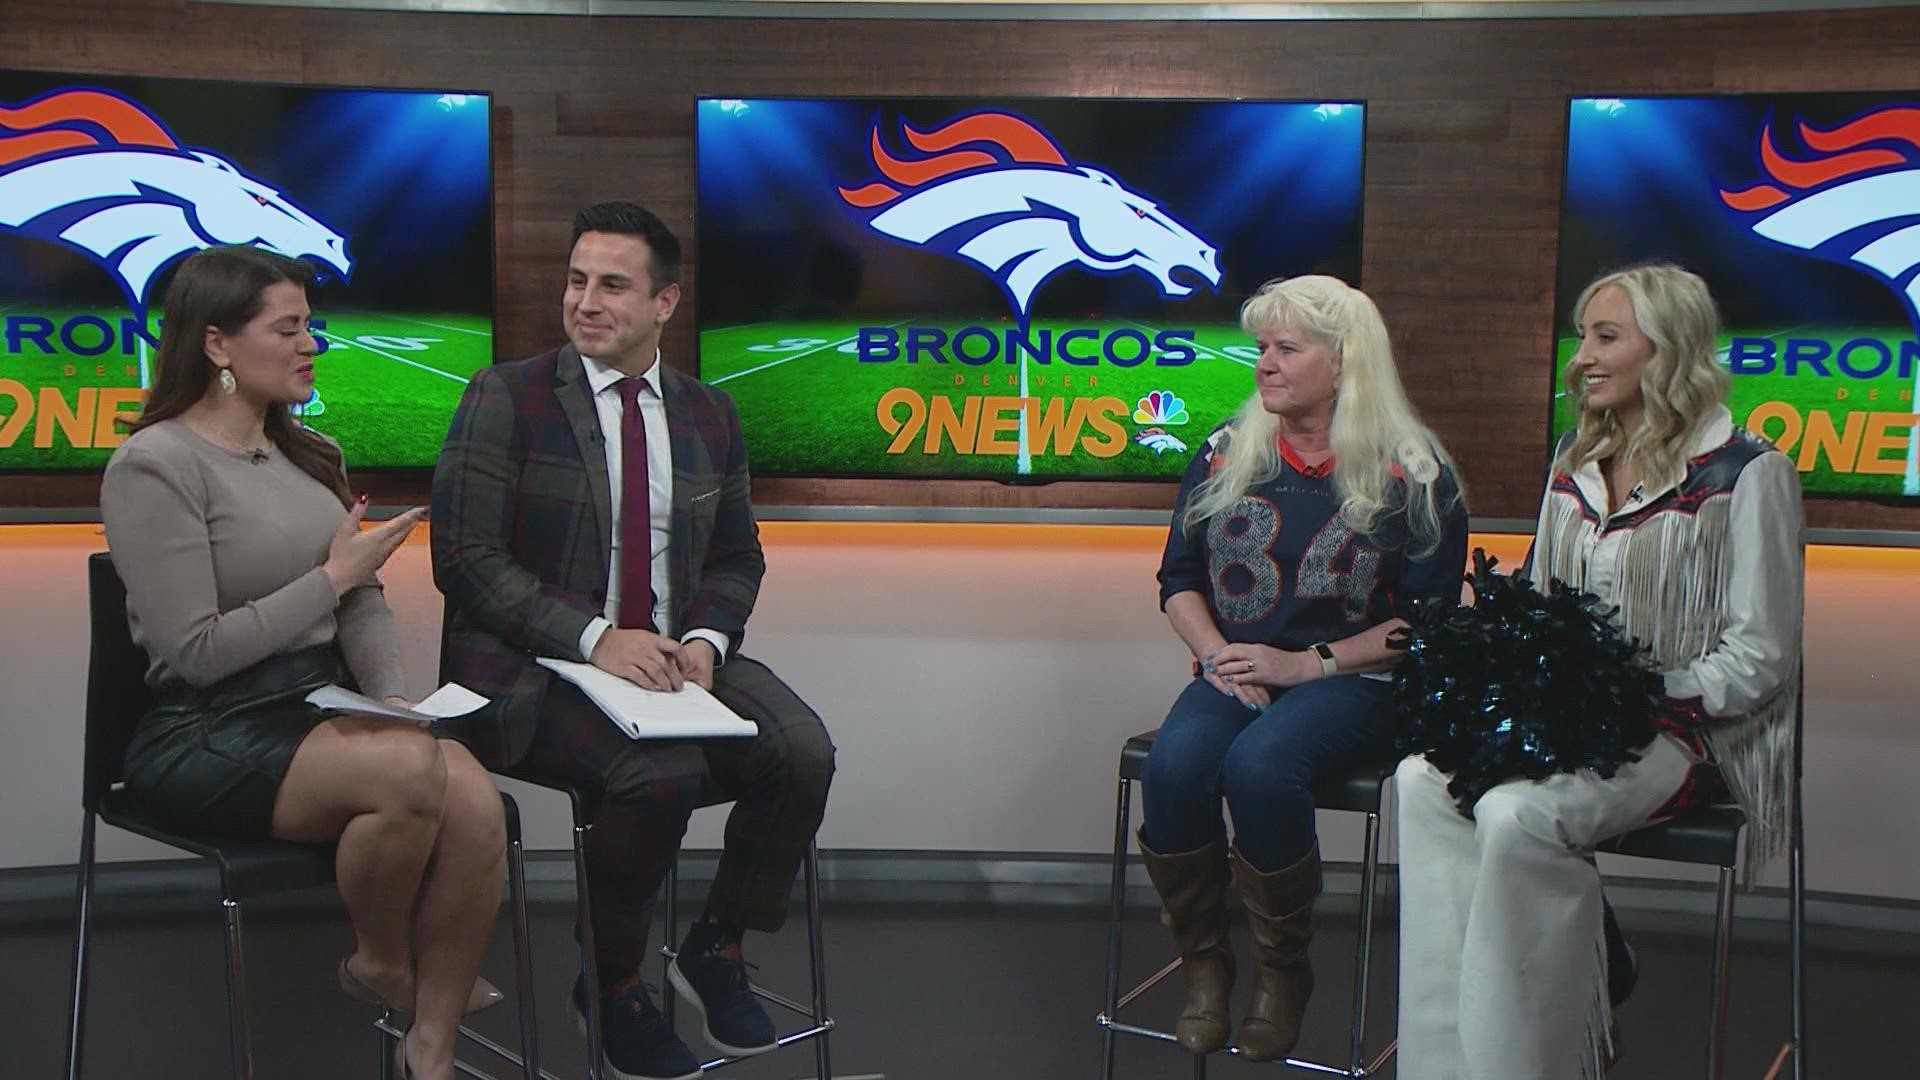 Fans heading to the Broncos game on Sunday, Jan. 8 can win prizes and more.